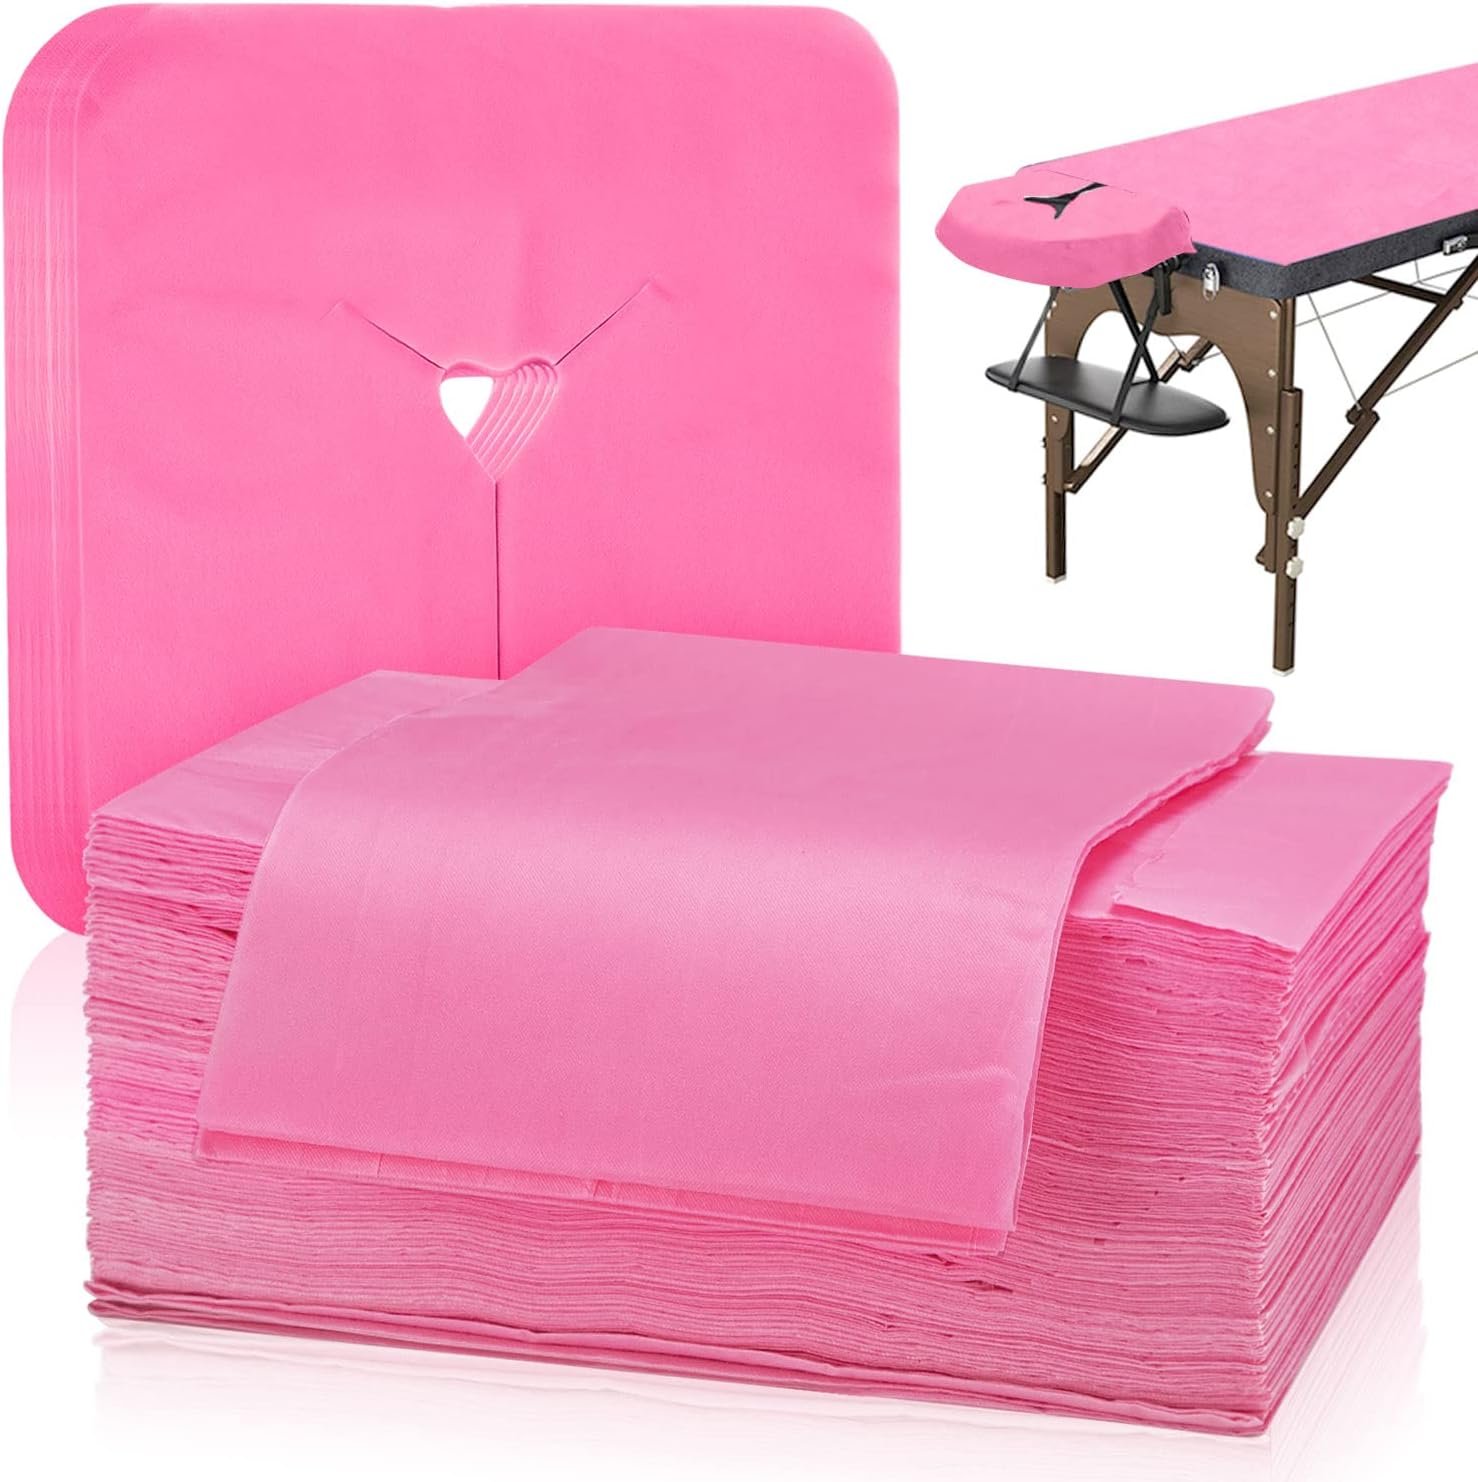 Noverlife 60PCS Disposable Massage Table Covers  Face Rest Barrier, Waterpoof Oilproof Disposable Sheets Table Cover for Spa Beauty Salon, Breathable Non Woven Fabric Face Cradle Covers - Pink